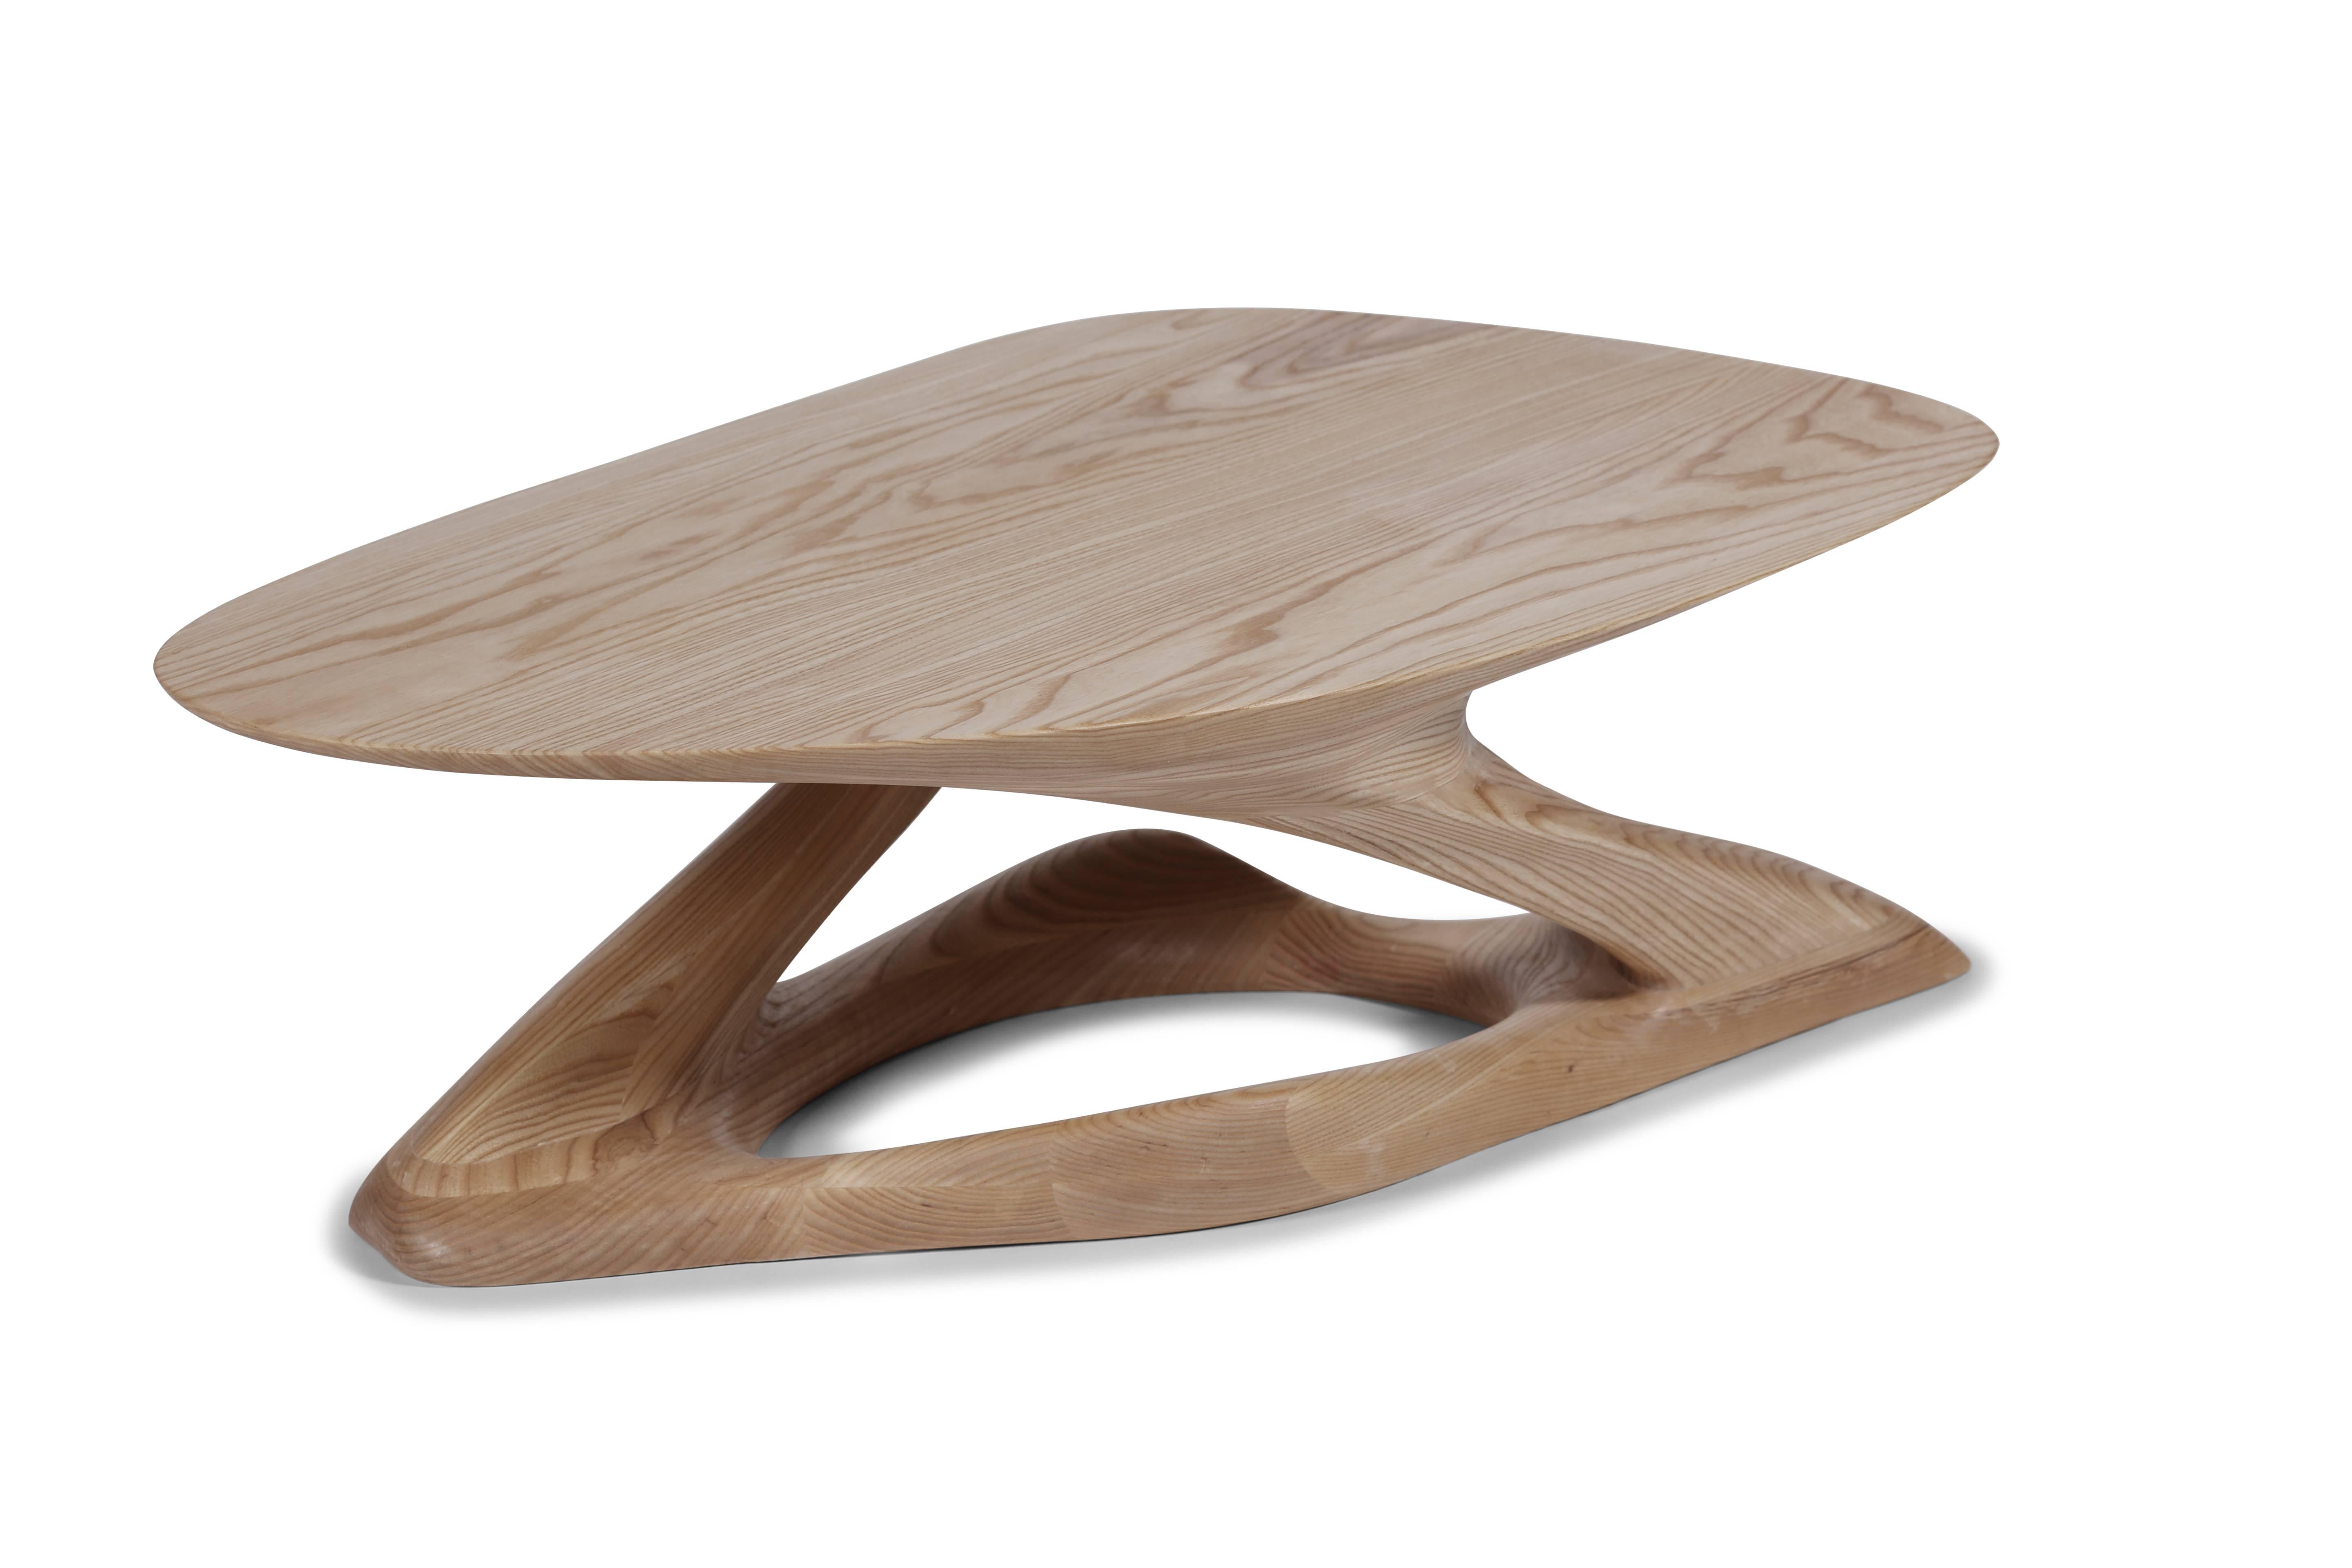 Plie coffee table is a stylish futuristic sculptural art table with a dynamic form designed and manufactured by Amorph. Plie is made out of solid ashwood and stained with dark walnut. By the nature, the ashwood grain’s look would be slightly